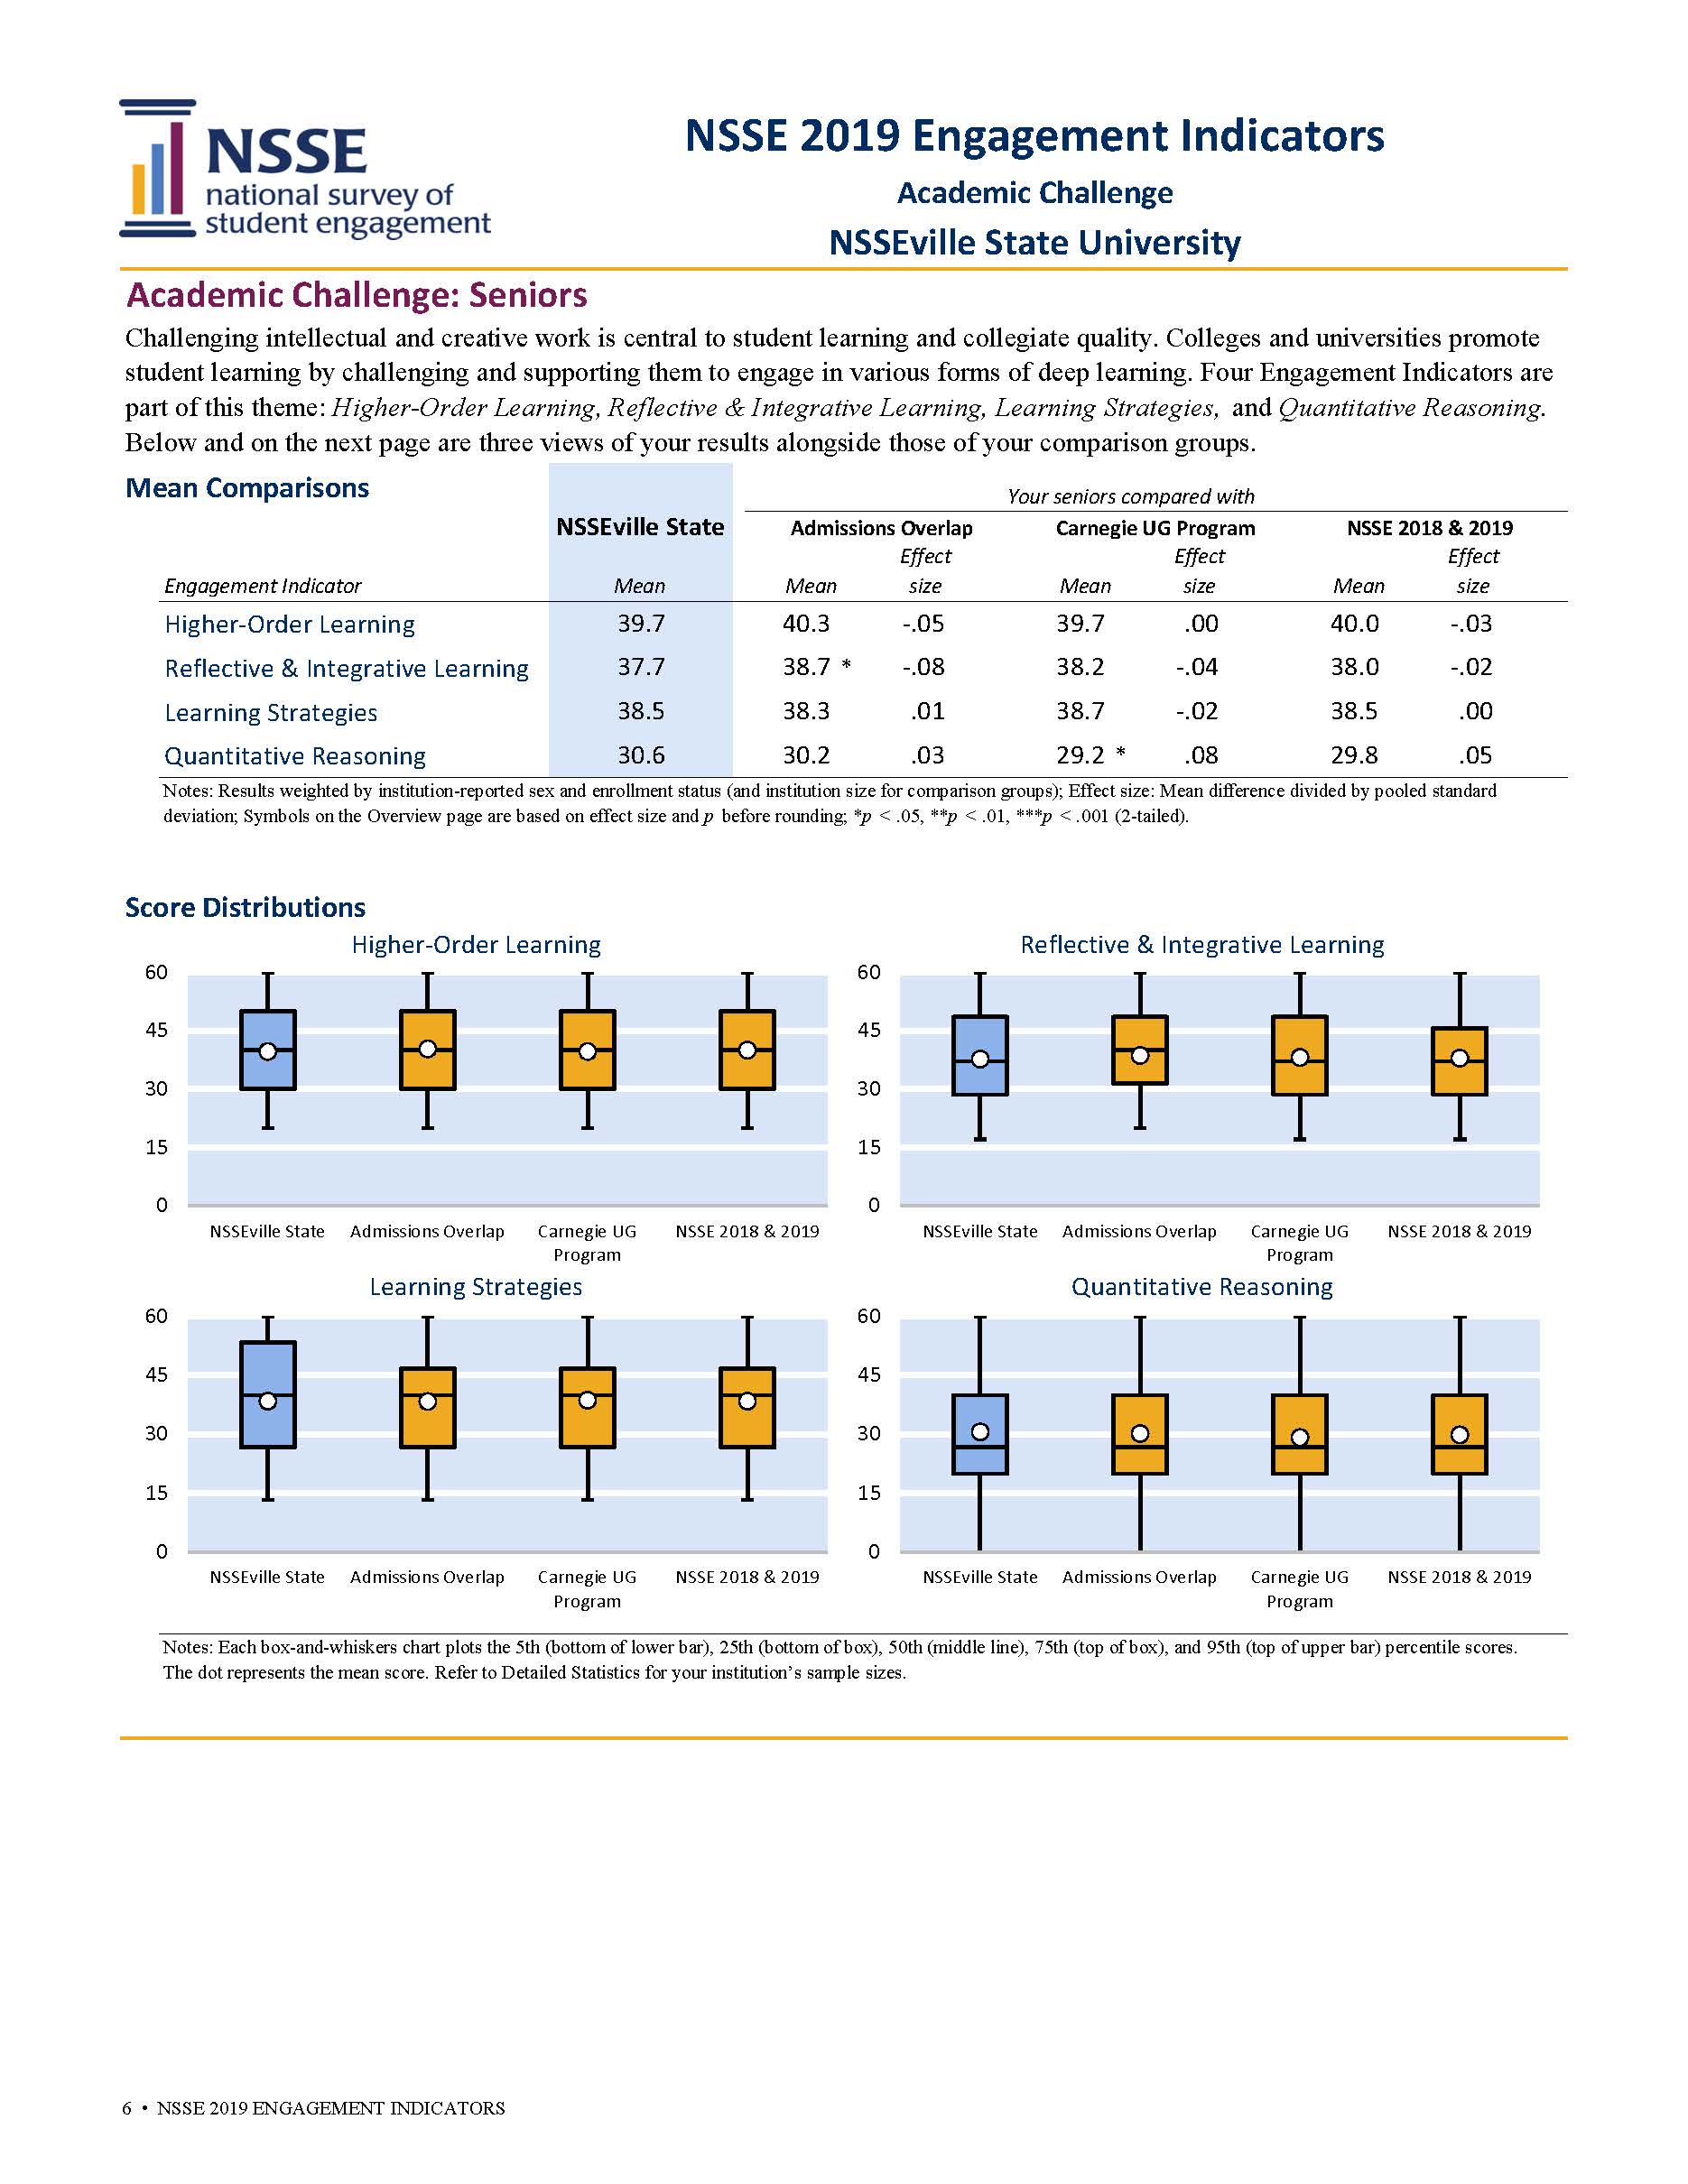 Sample Report: page 6 of NSSE Engagement Indicators